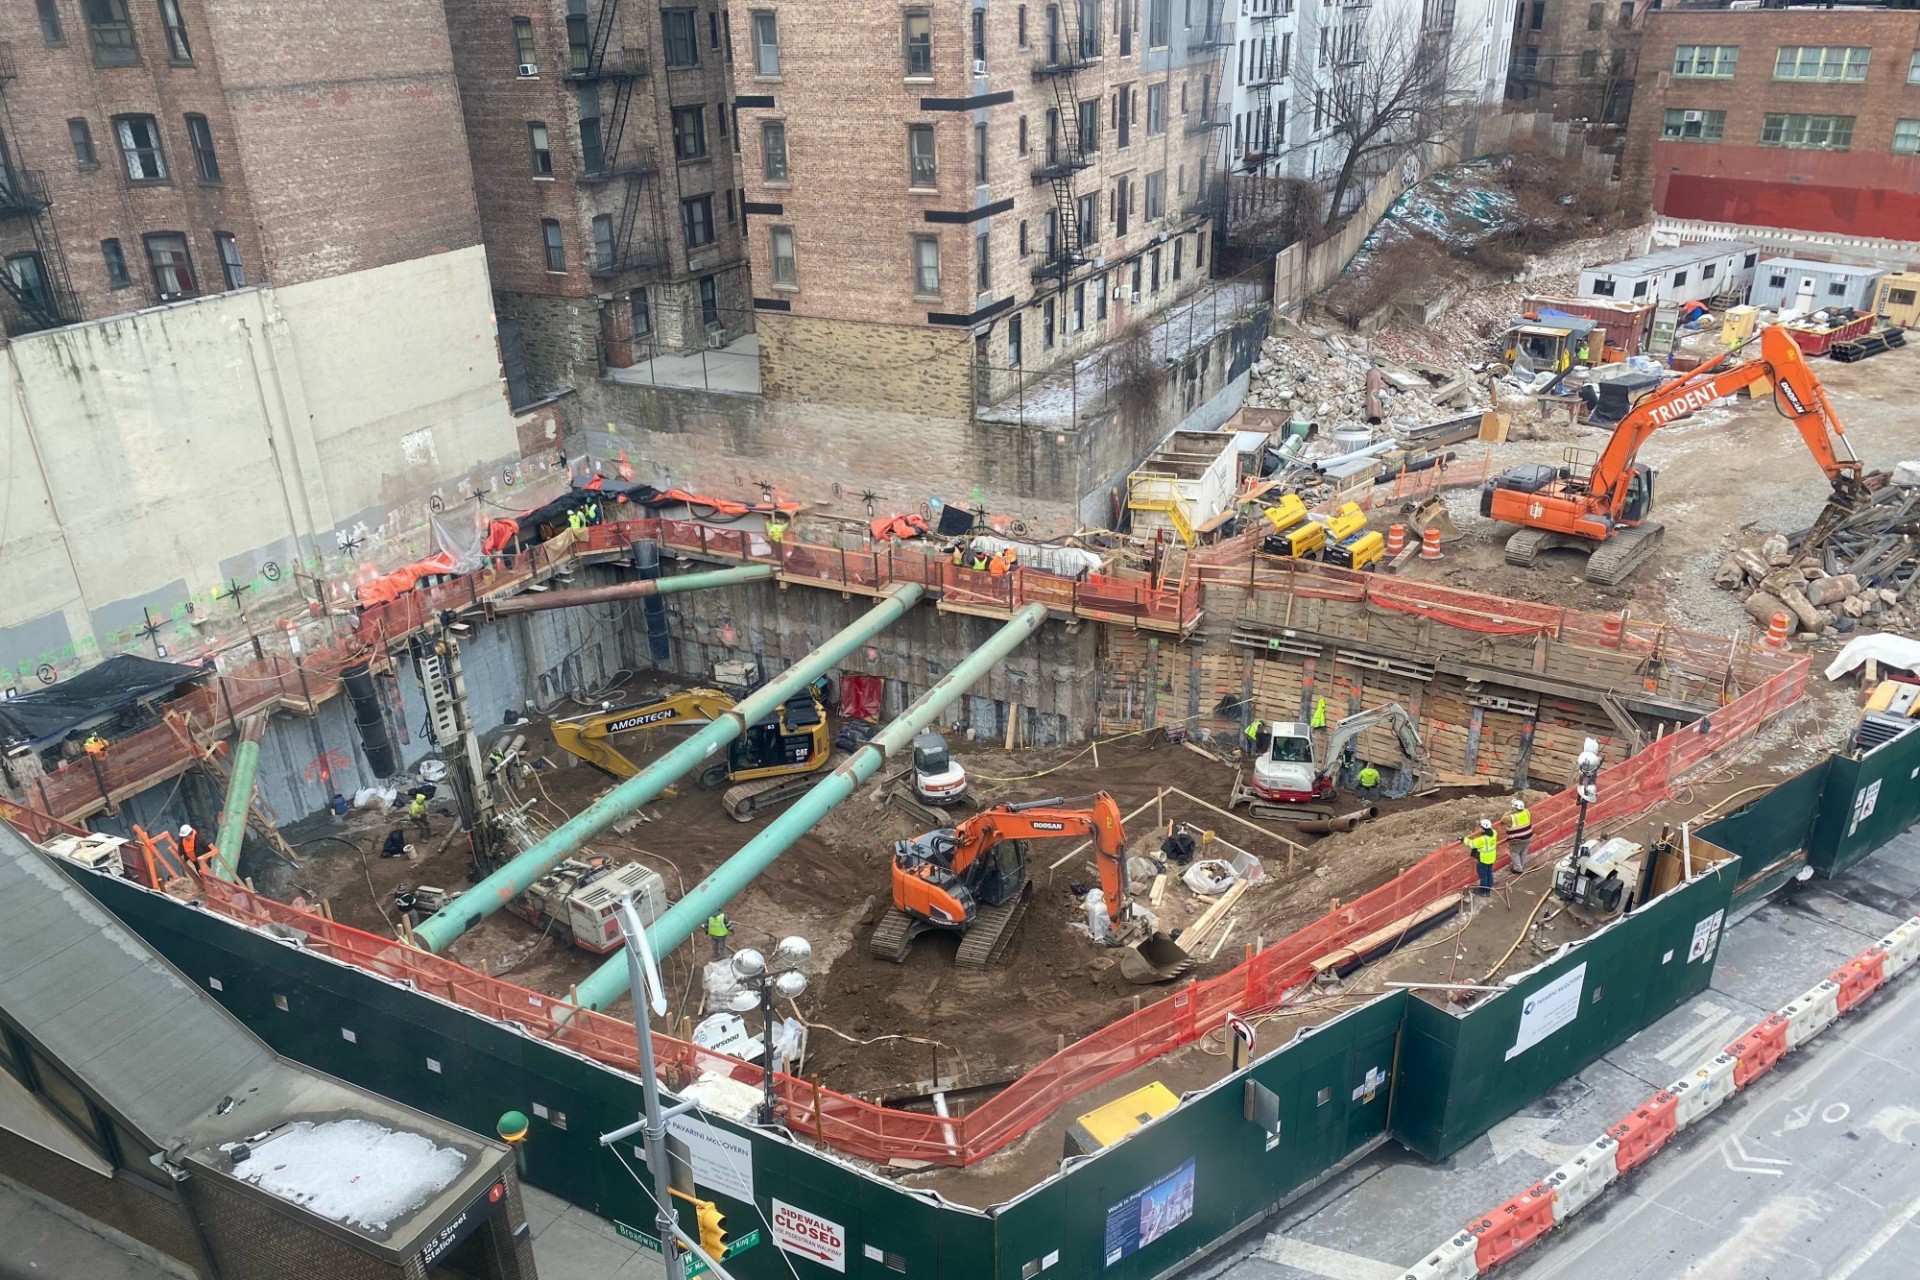 Excavation work being performed on a construction site.  